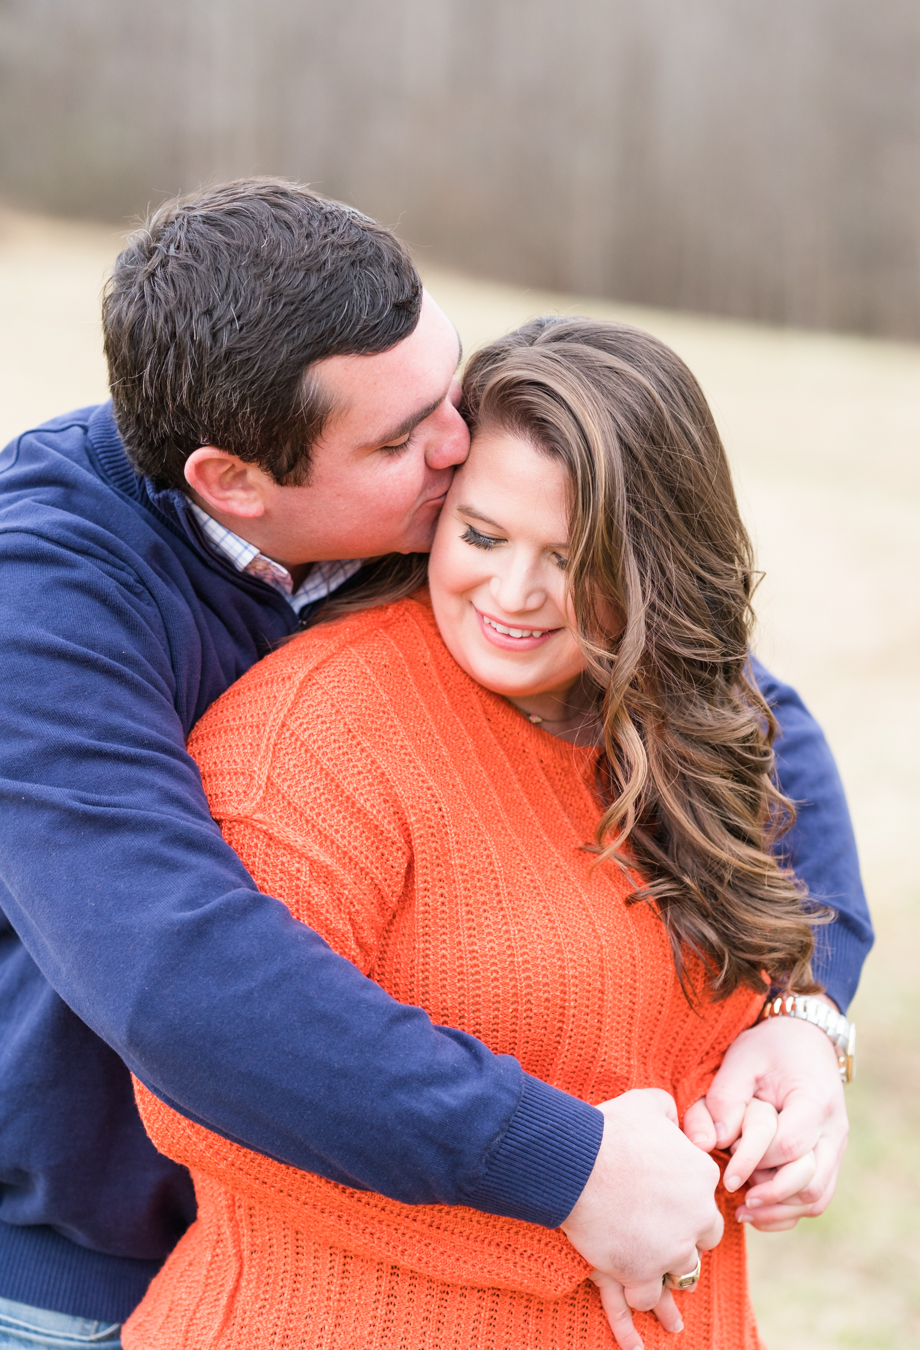 Outdoor-Couples-Photography-Greenville-SC-1